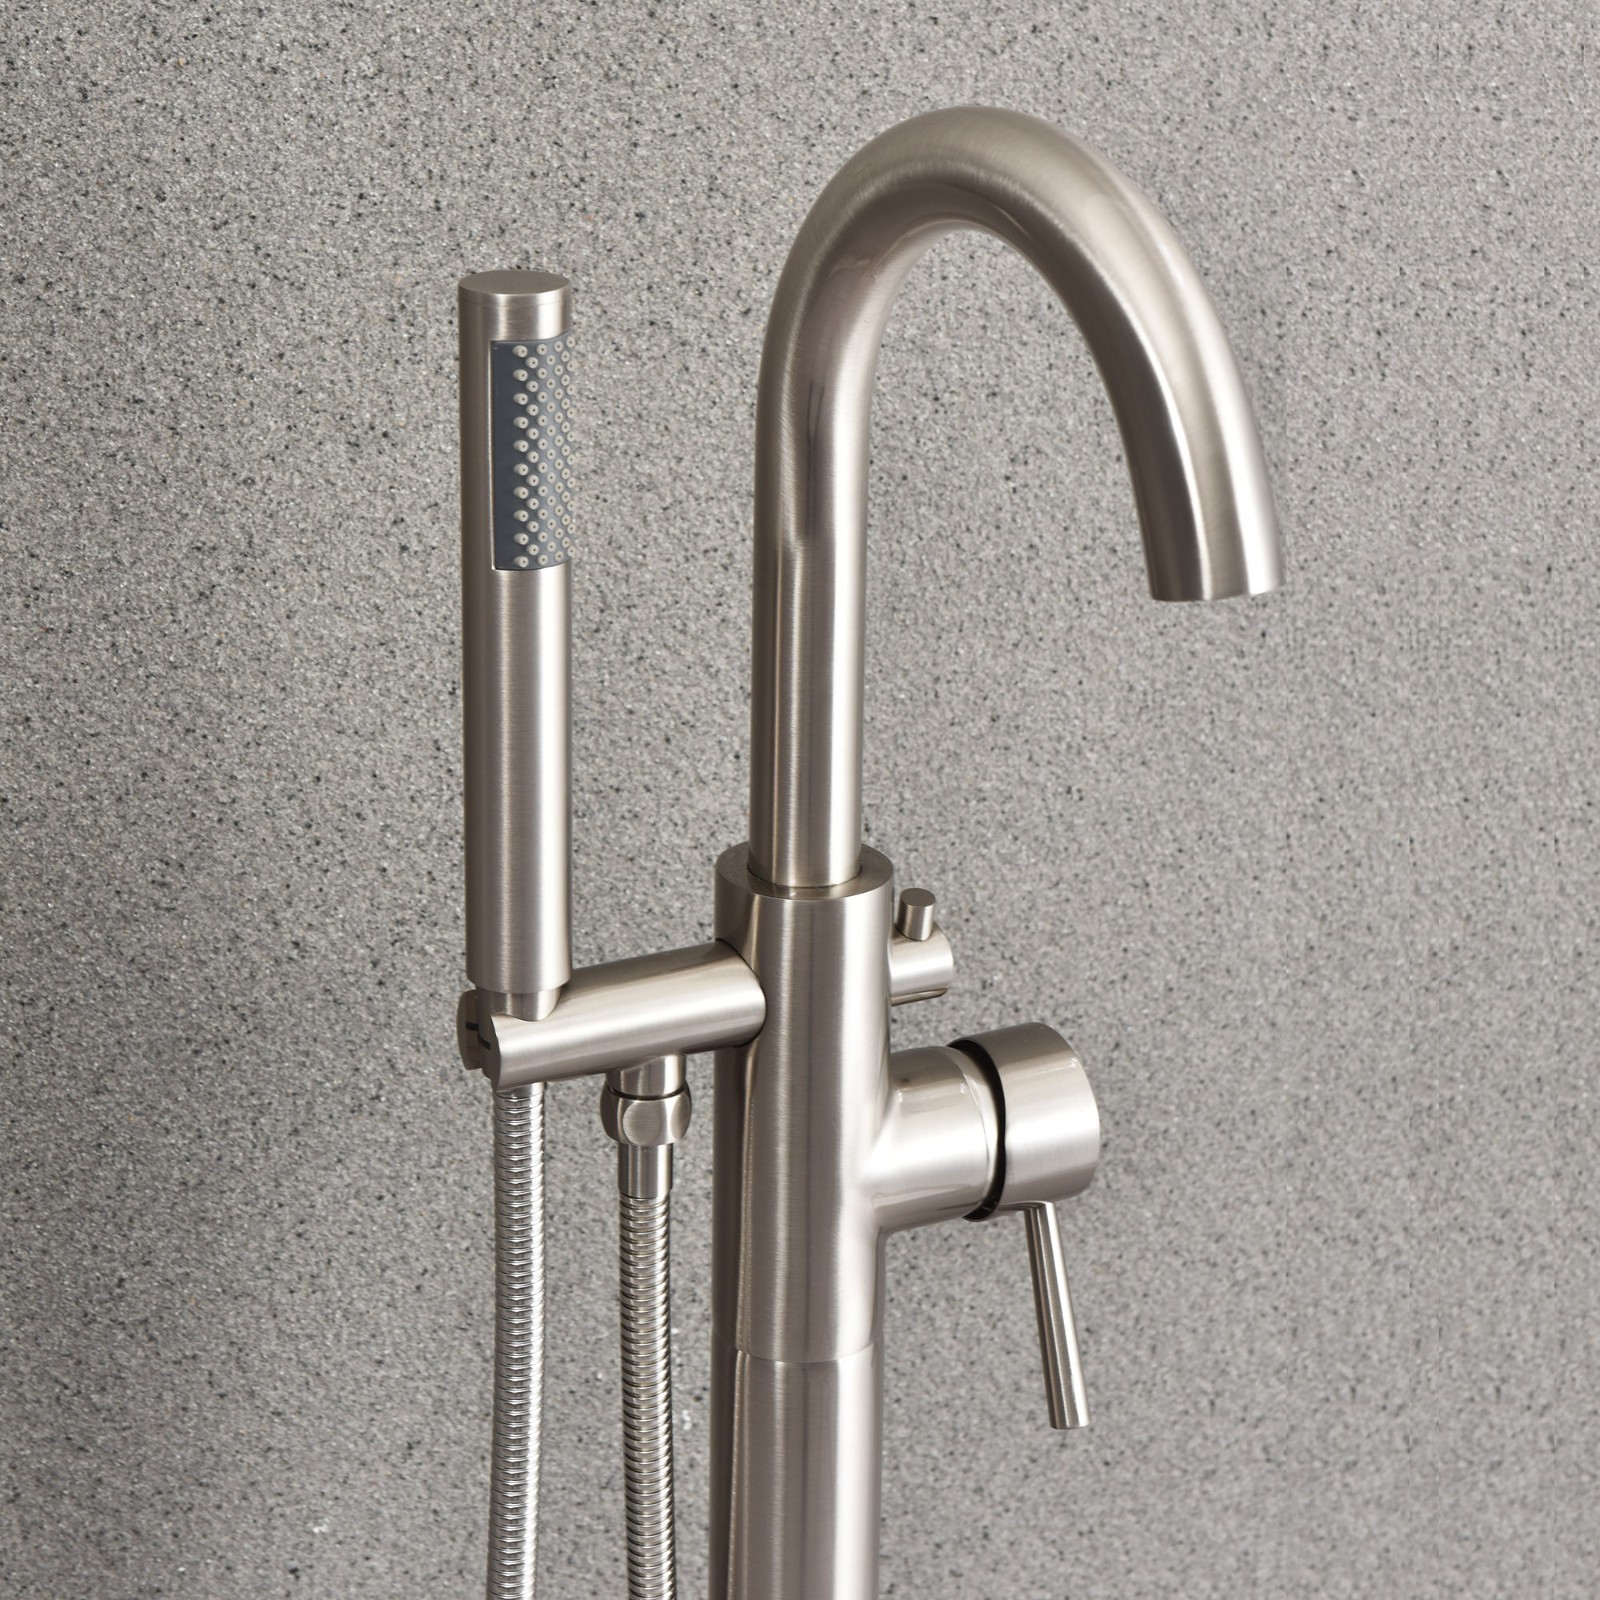  WOODBRIDGE F0001BNRD Contemporary Single Handle Floor Mount Freestanding Tub Filler Faucet with Hand shower in Brushed Nickel Finish._11105